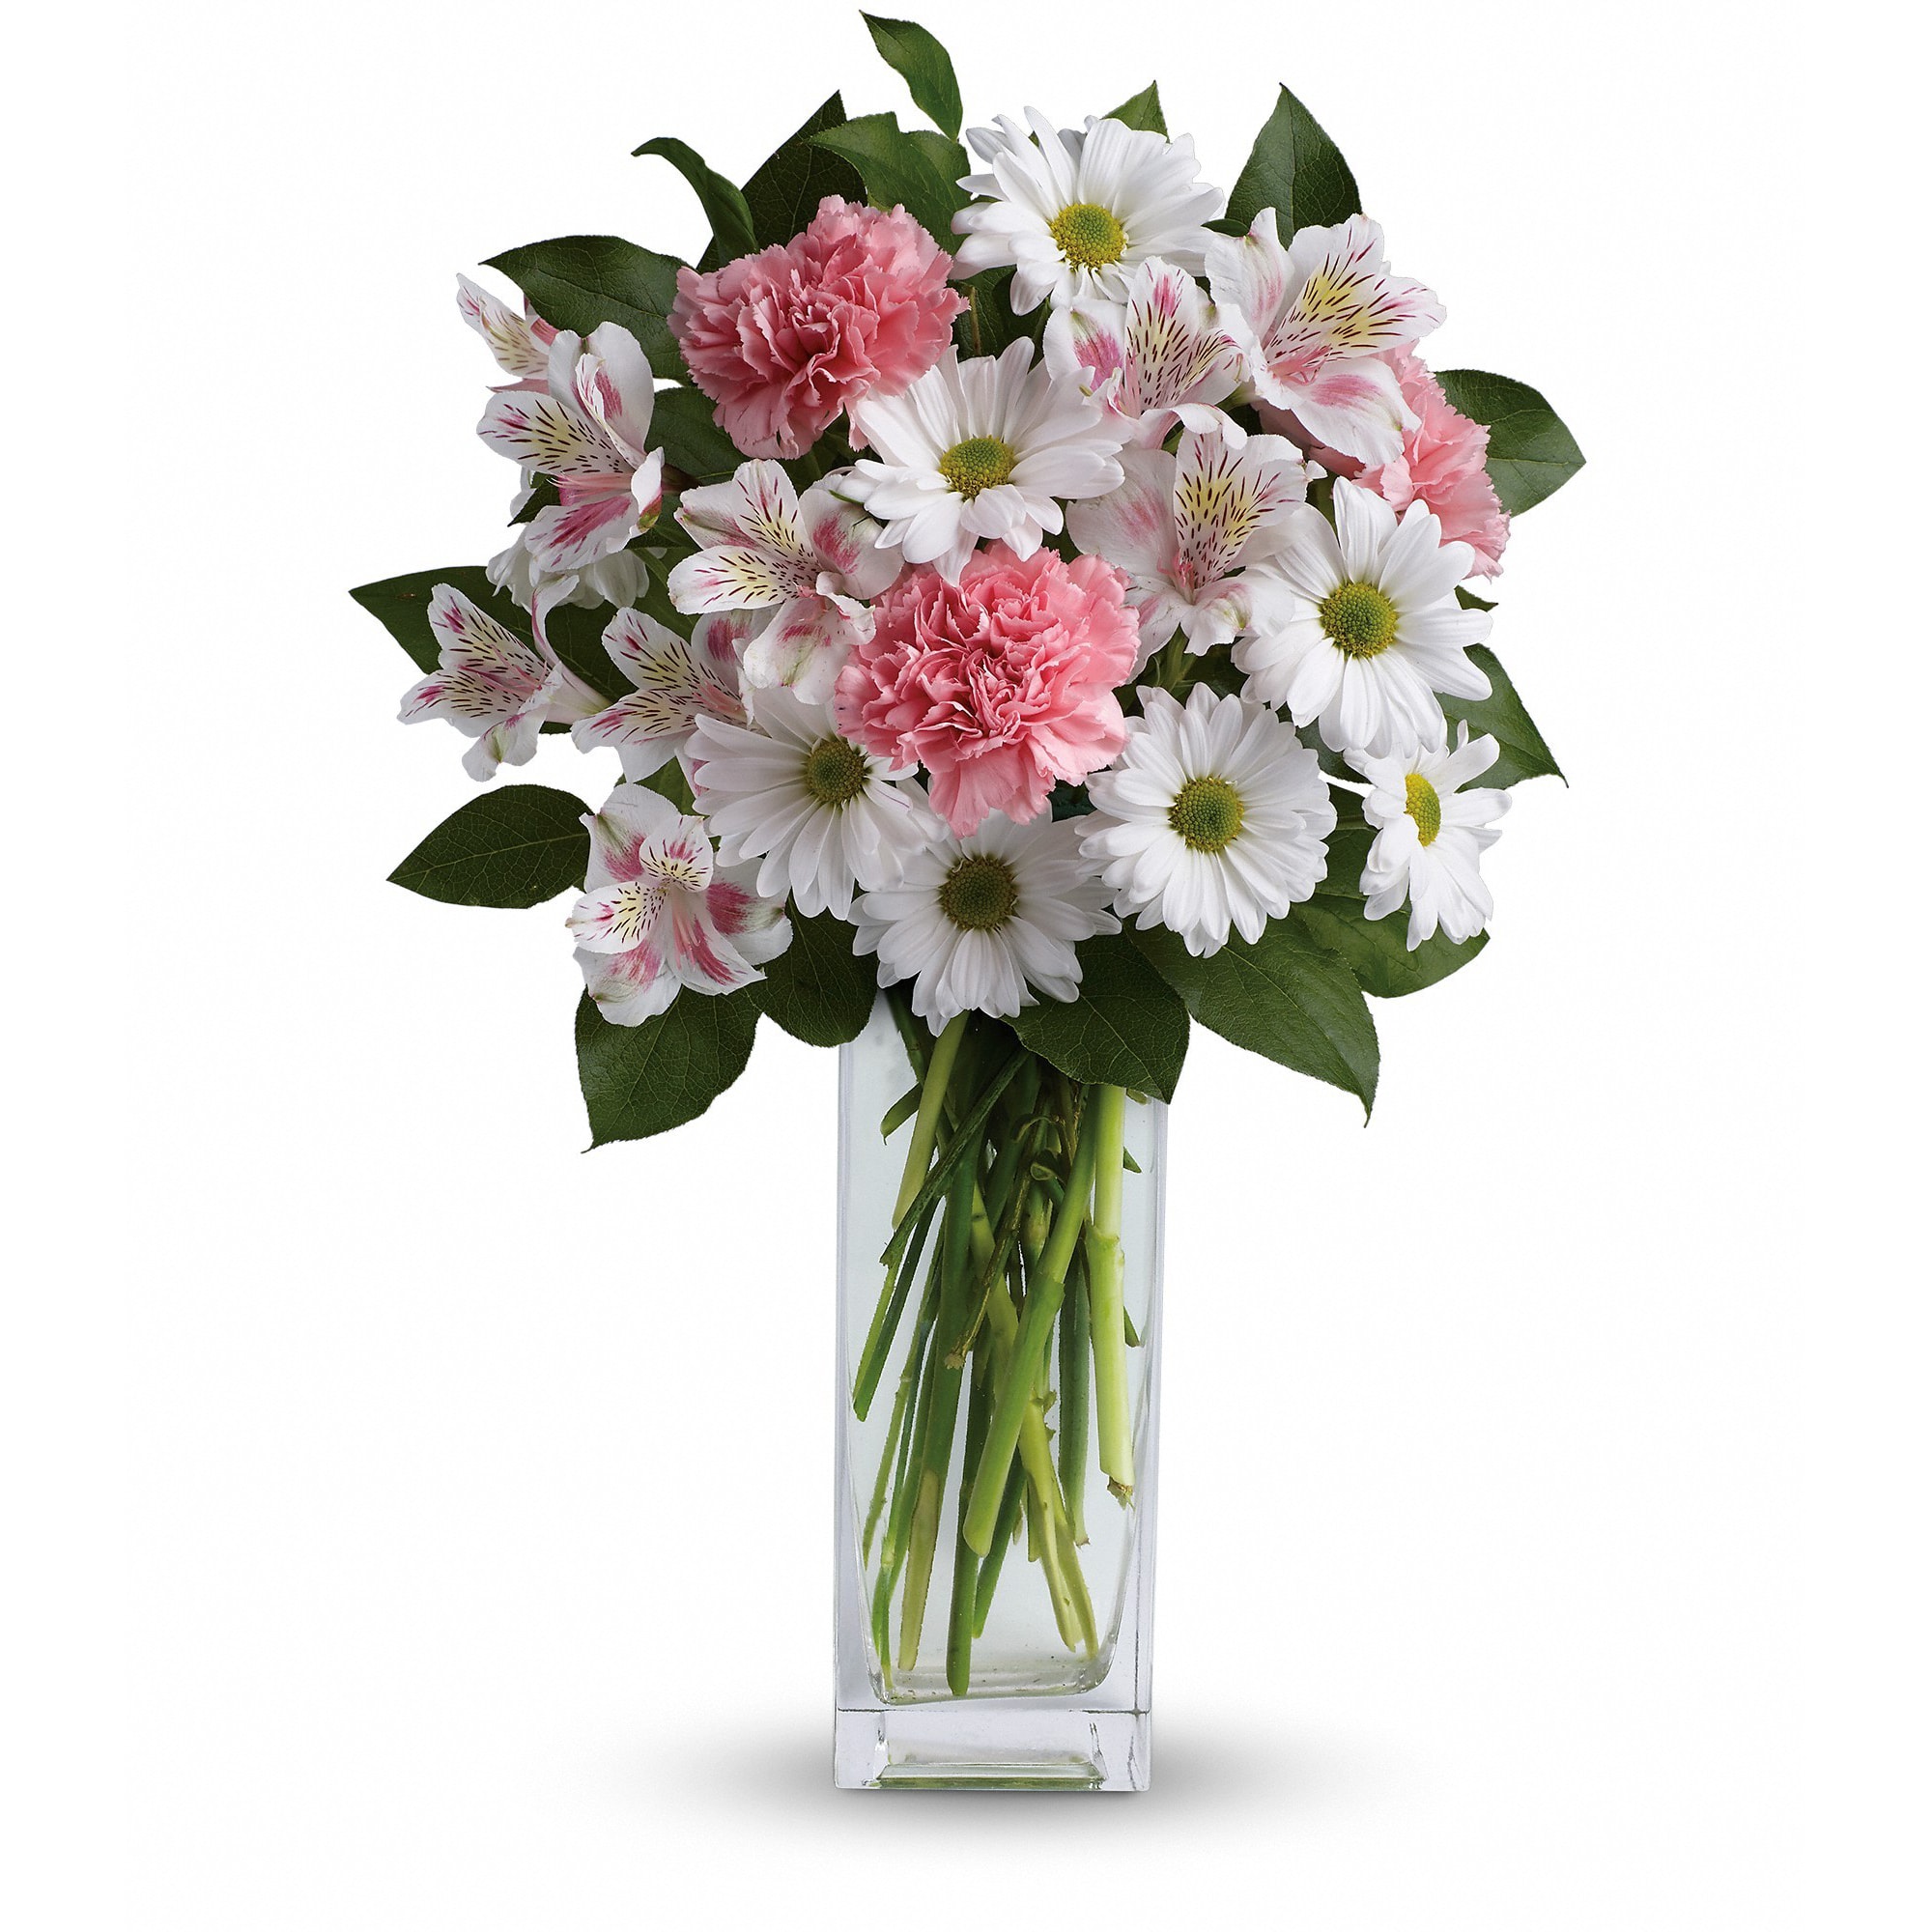 Sincerely Yours Bouquet by Teleflora - Soft and delicate, this pale pink and white bouquet speaks to the purity and simplicity of your adoration. 